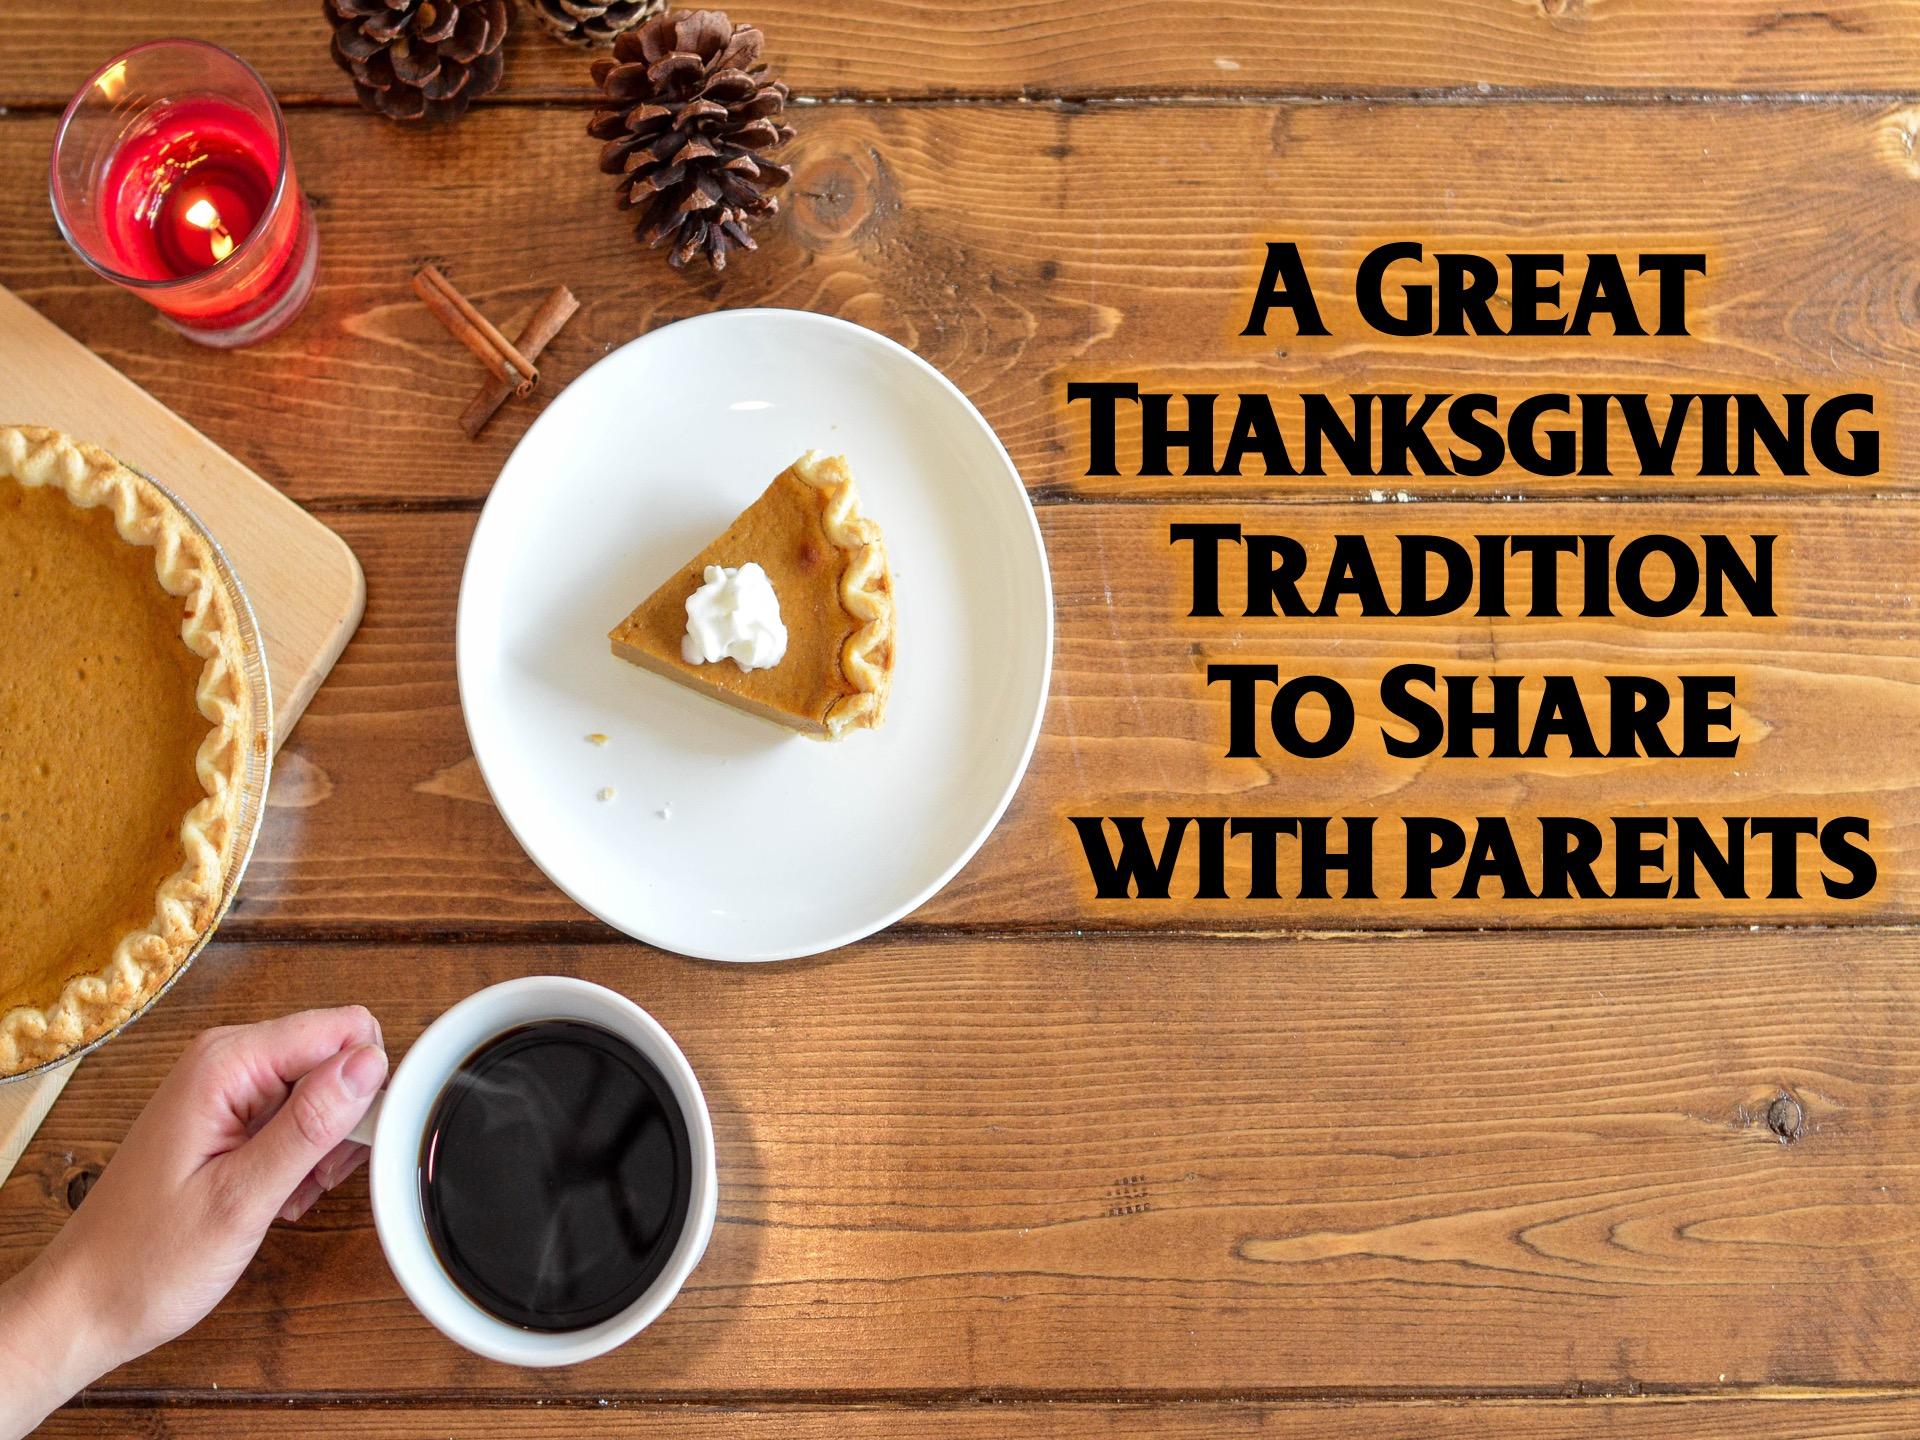 A Great Thanksgiving Tradition to Share with Families